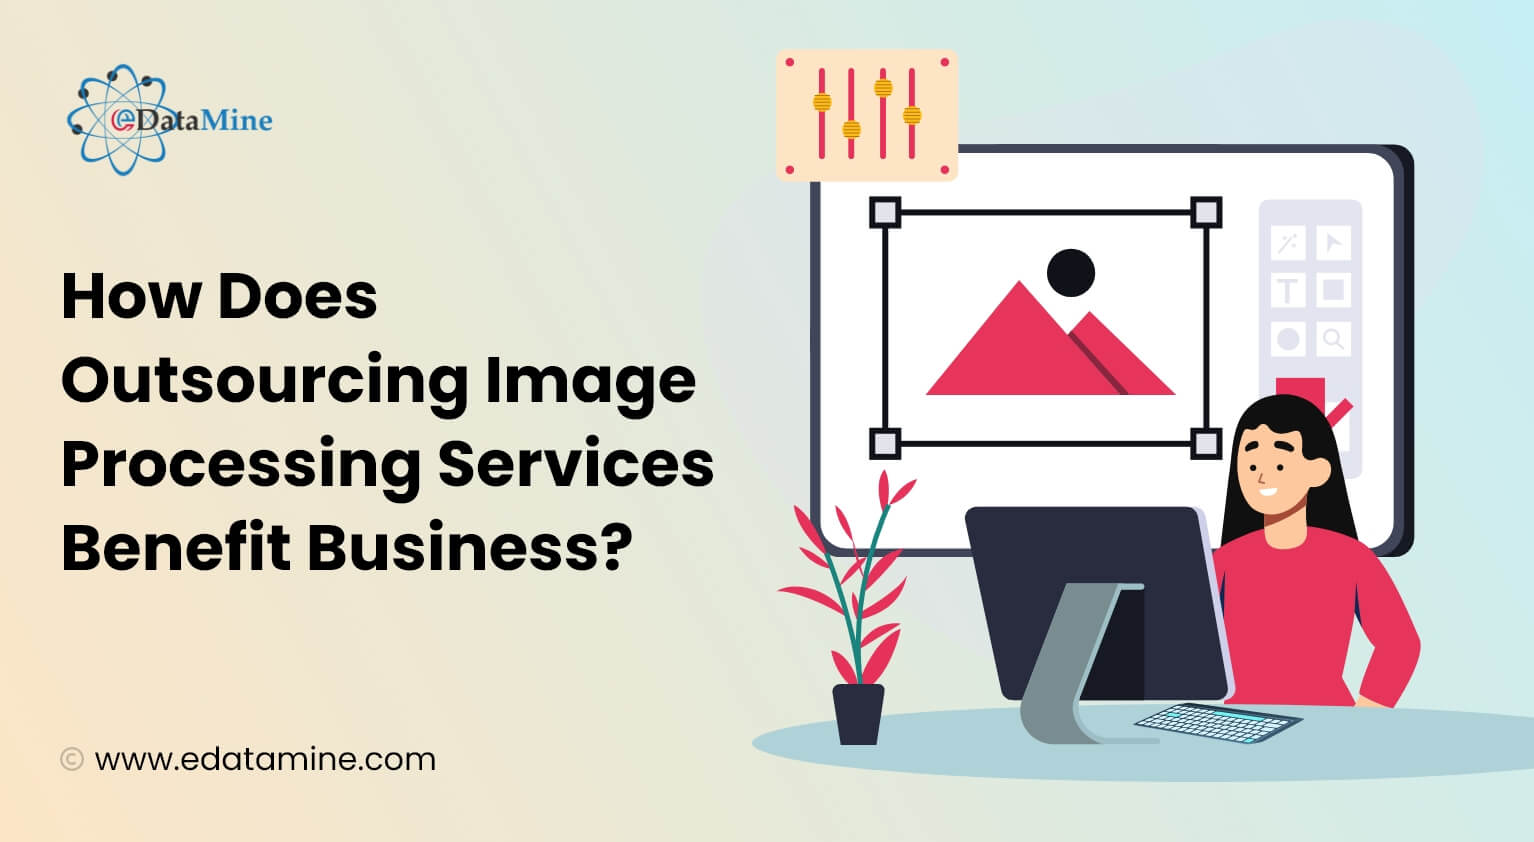 How Does Outsourcing Image Processing Services Benefit Business